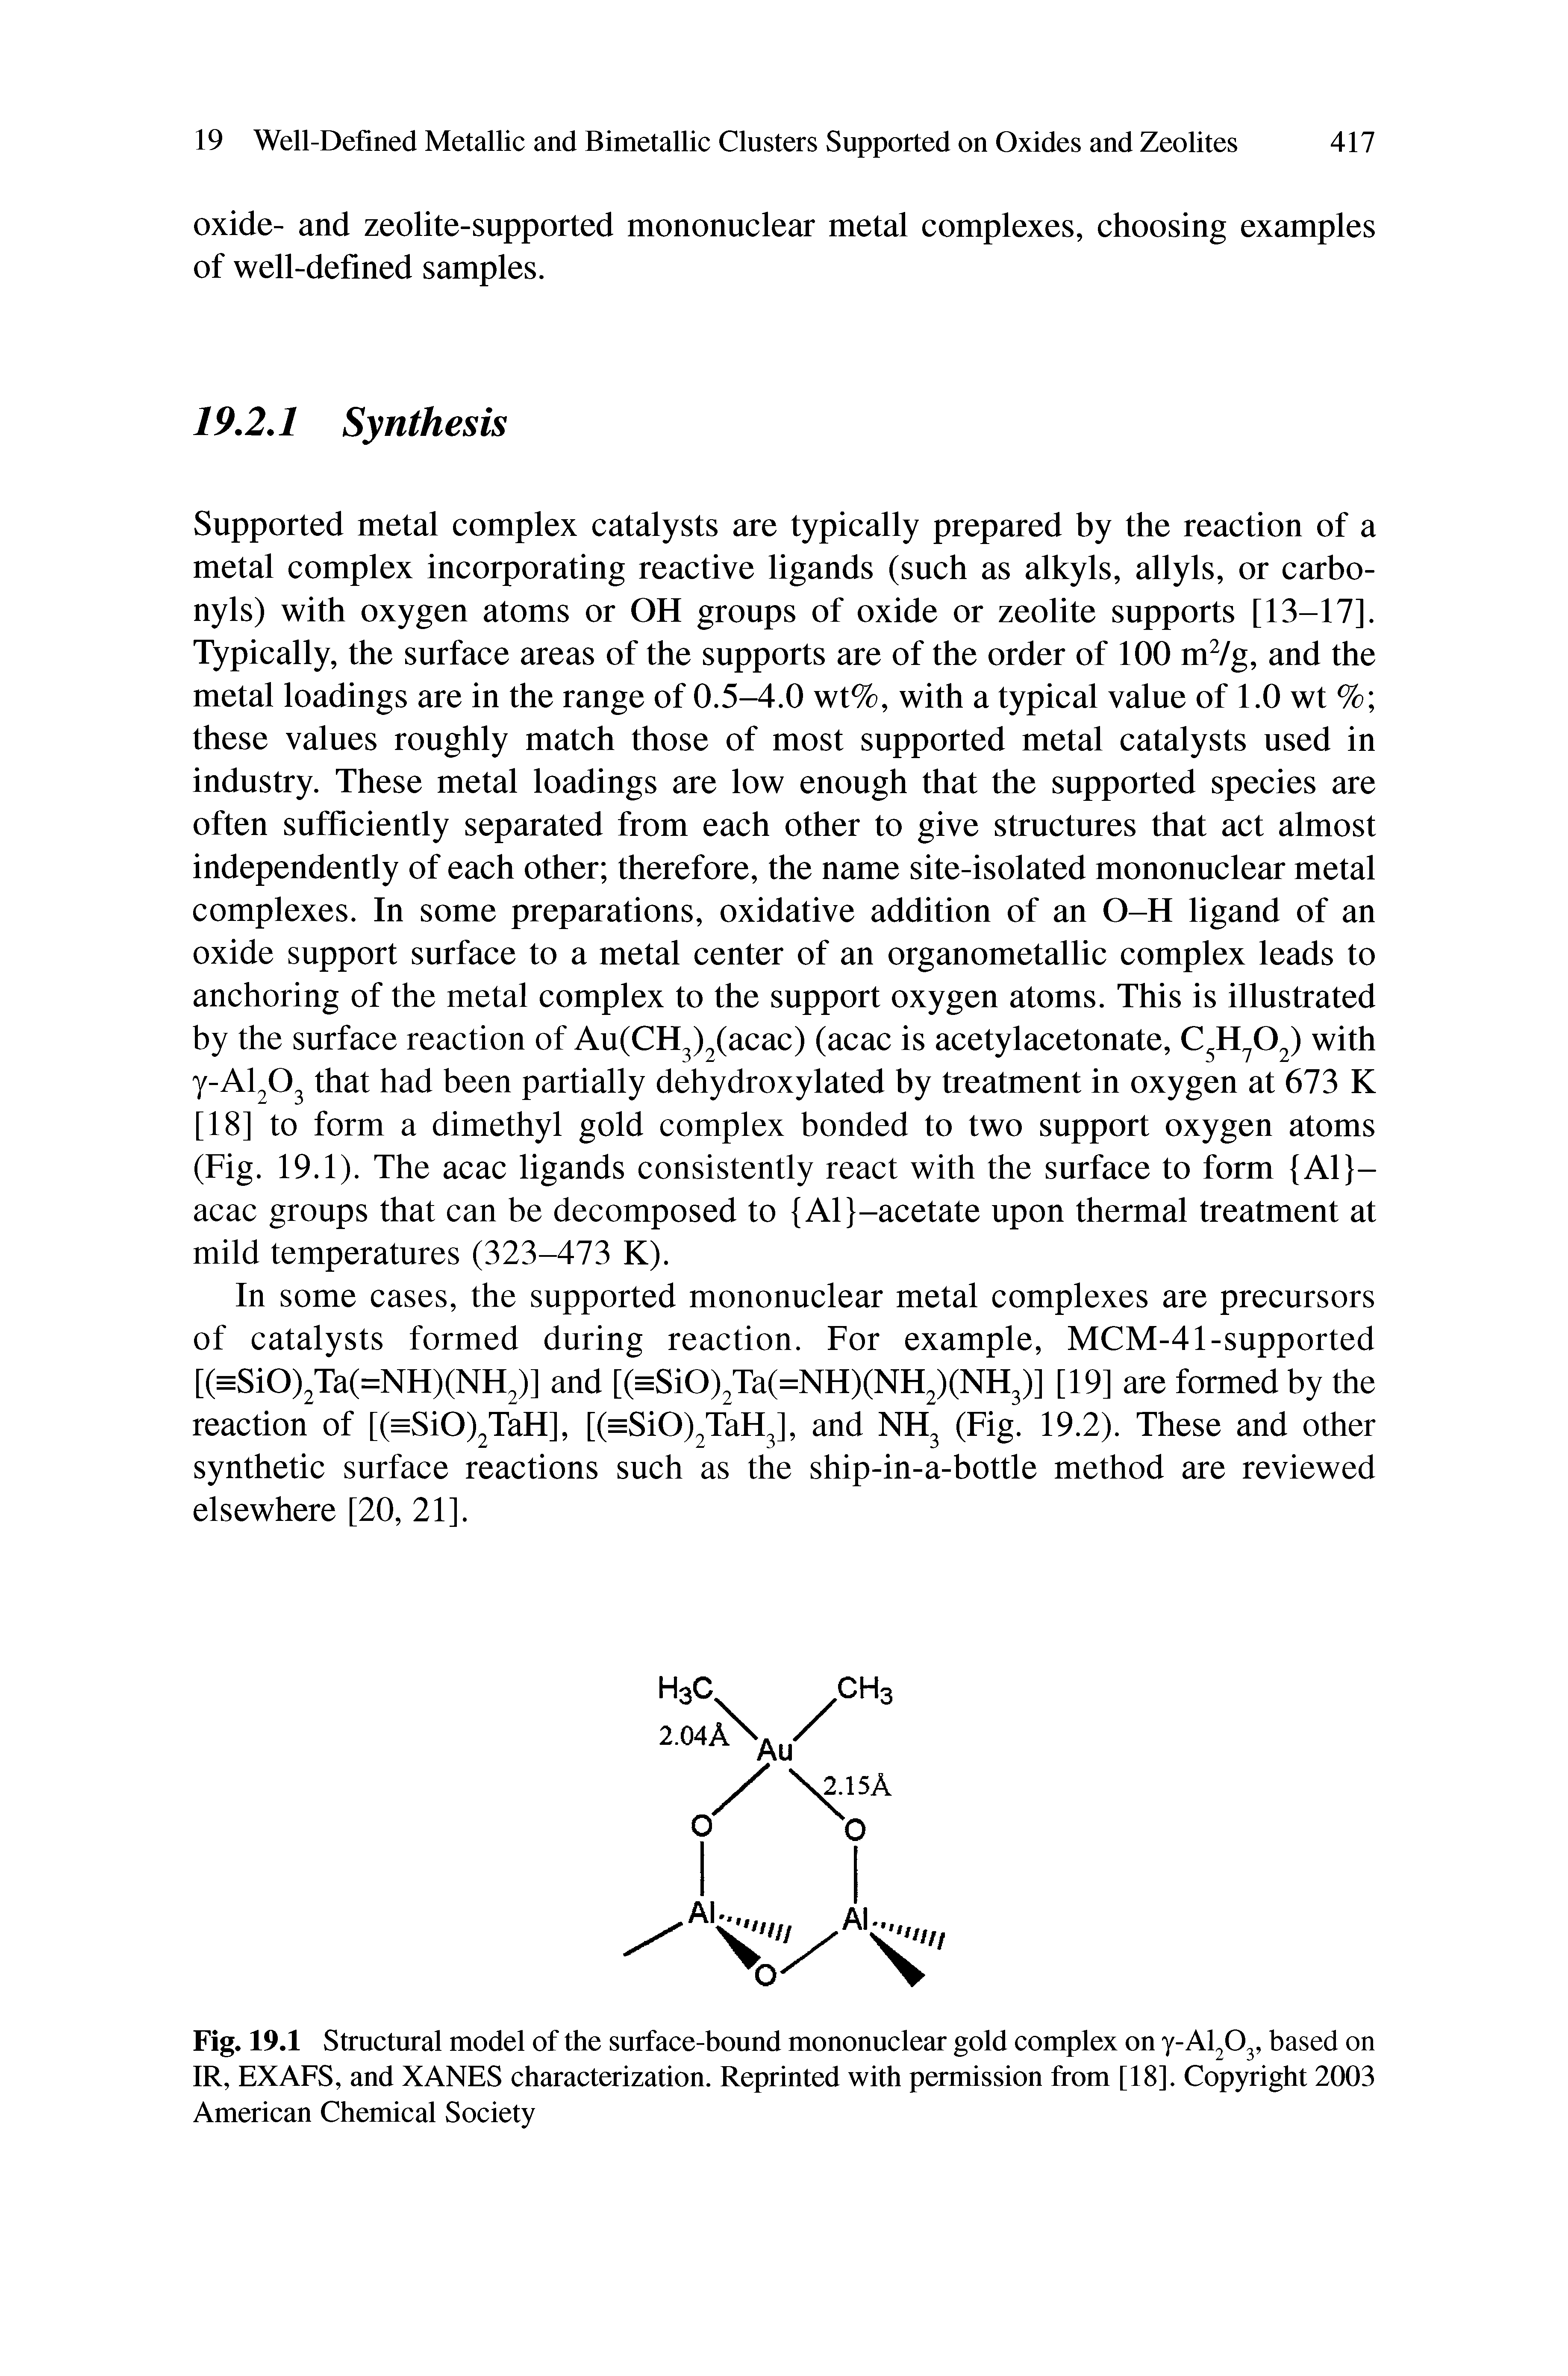 Fig. 19.1 Structural model of the surface-bound mononuclear gold complex on y-Al203, based on IR, EXAFS, and XANES characterization. Reprinted with permission from [18]. Copyright 2003 American Chemical Society...